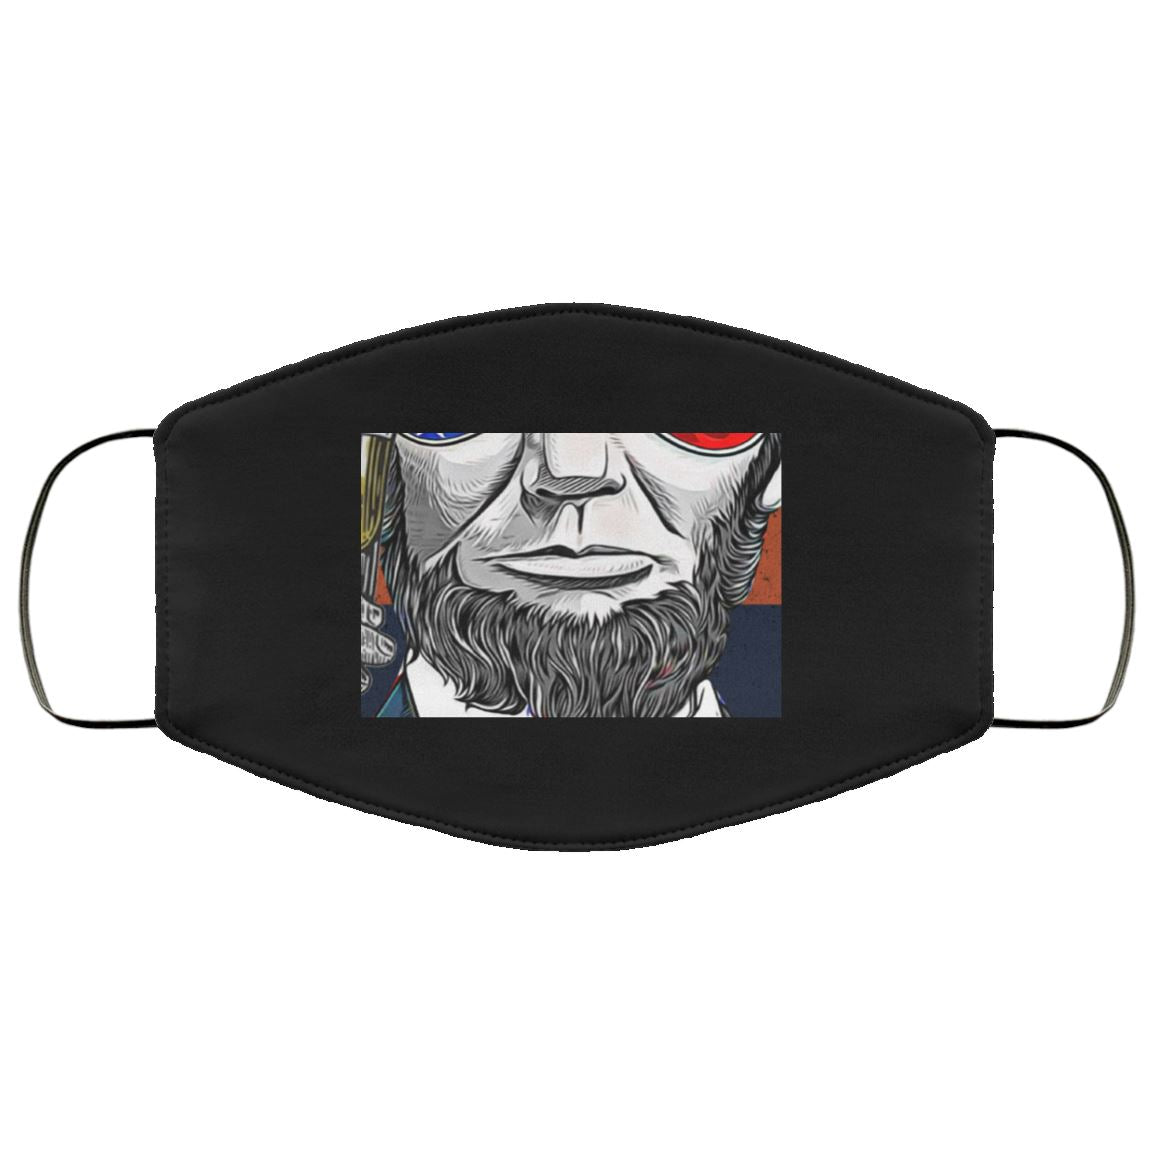 Abe Lincoln Facemask Face Mask - Houseboat Kings